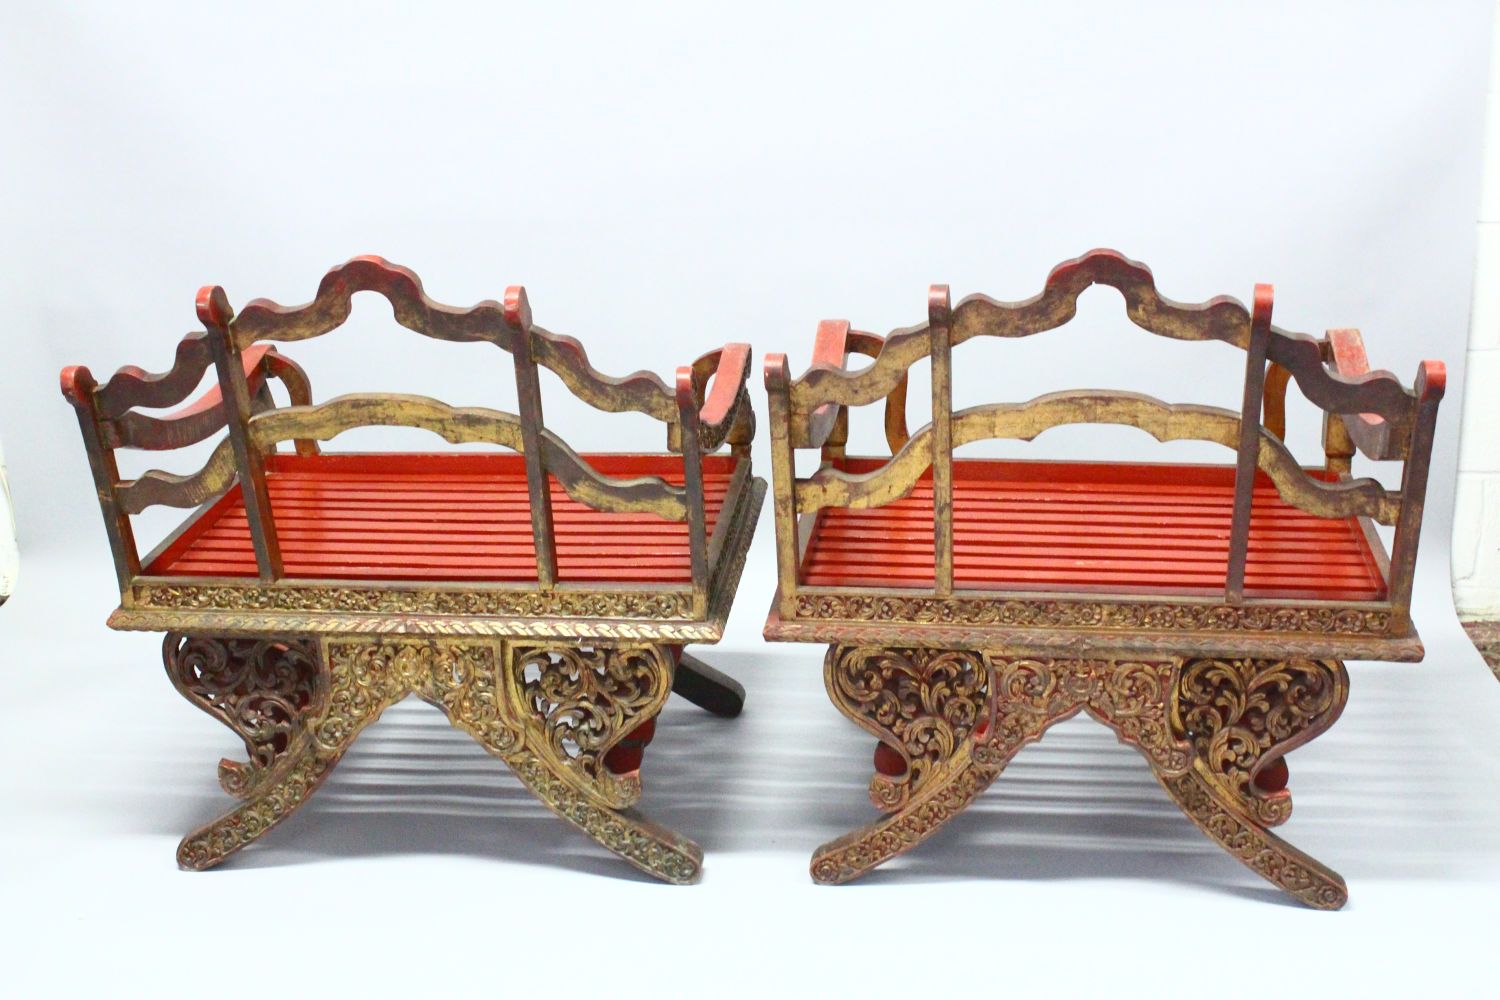 A PAIR OF 19TH/20TH CENTURY THAI CARVED HOWDAH ELEPHANT CHAIRS, profusely carved and pierced with - Image 8 of 10